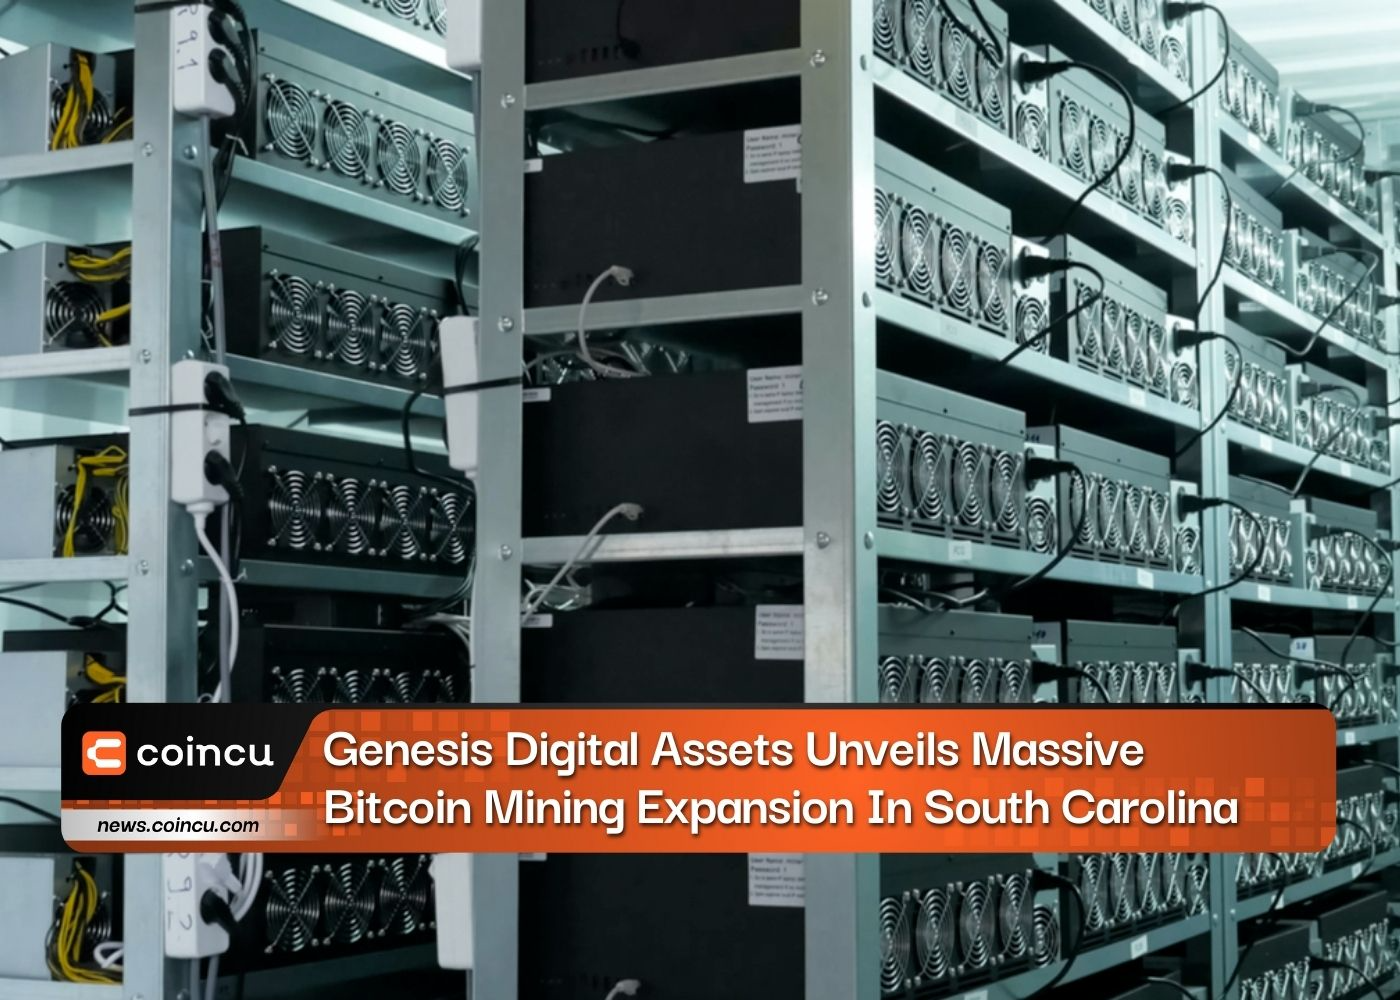 Genesis Digital Assets Unveils Massive Bitcoin Mining Expansion In South Carolina